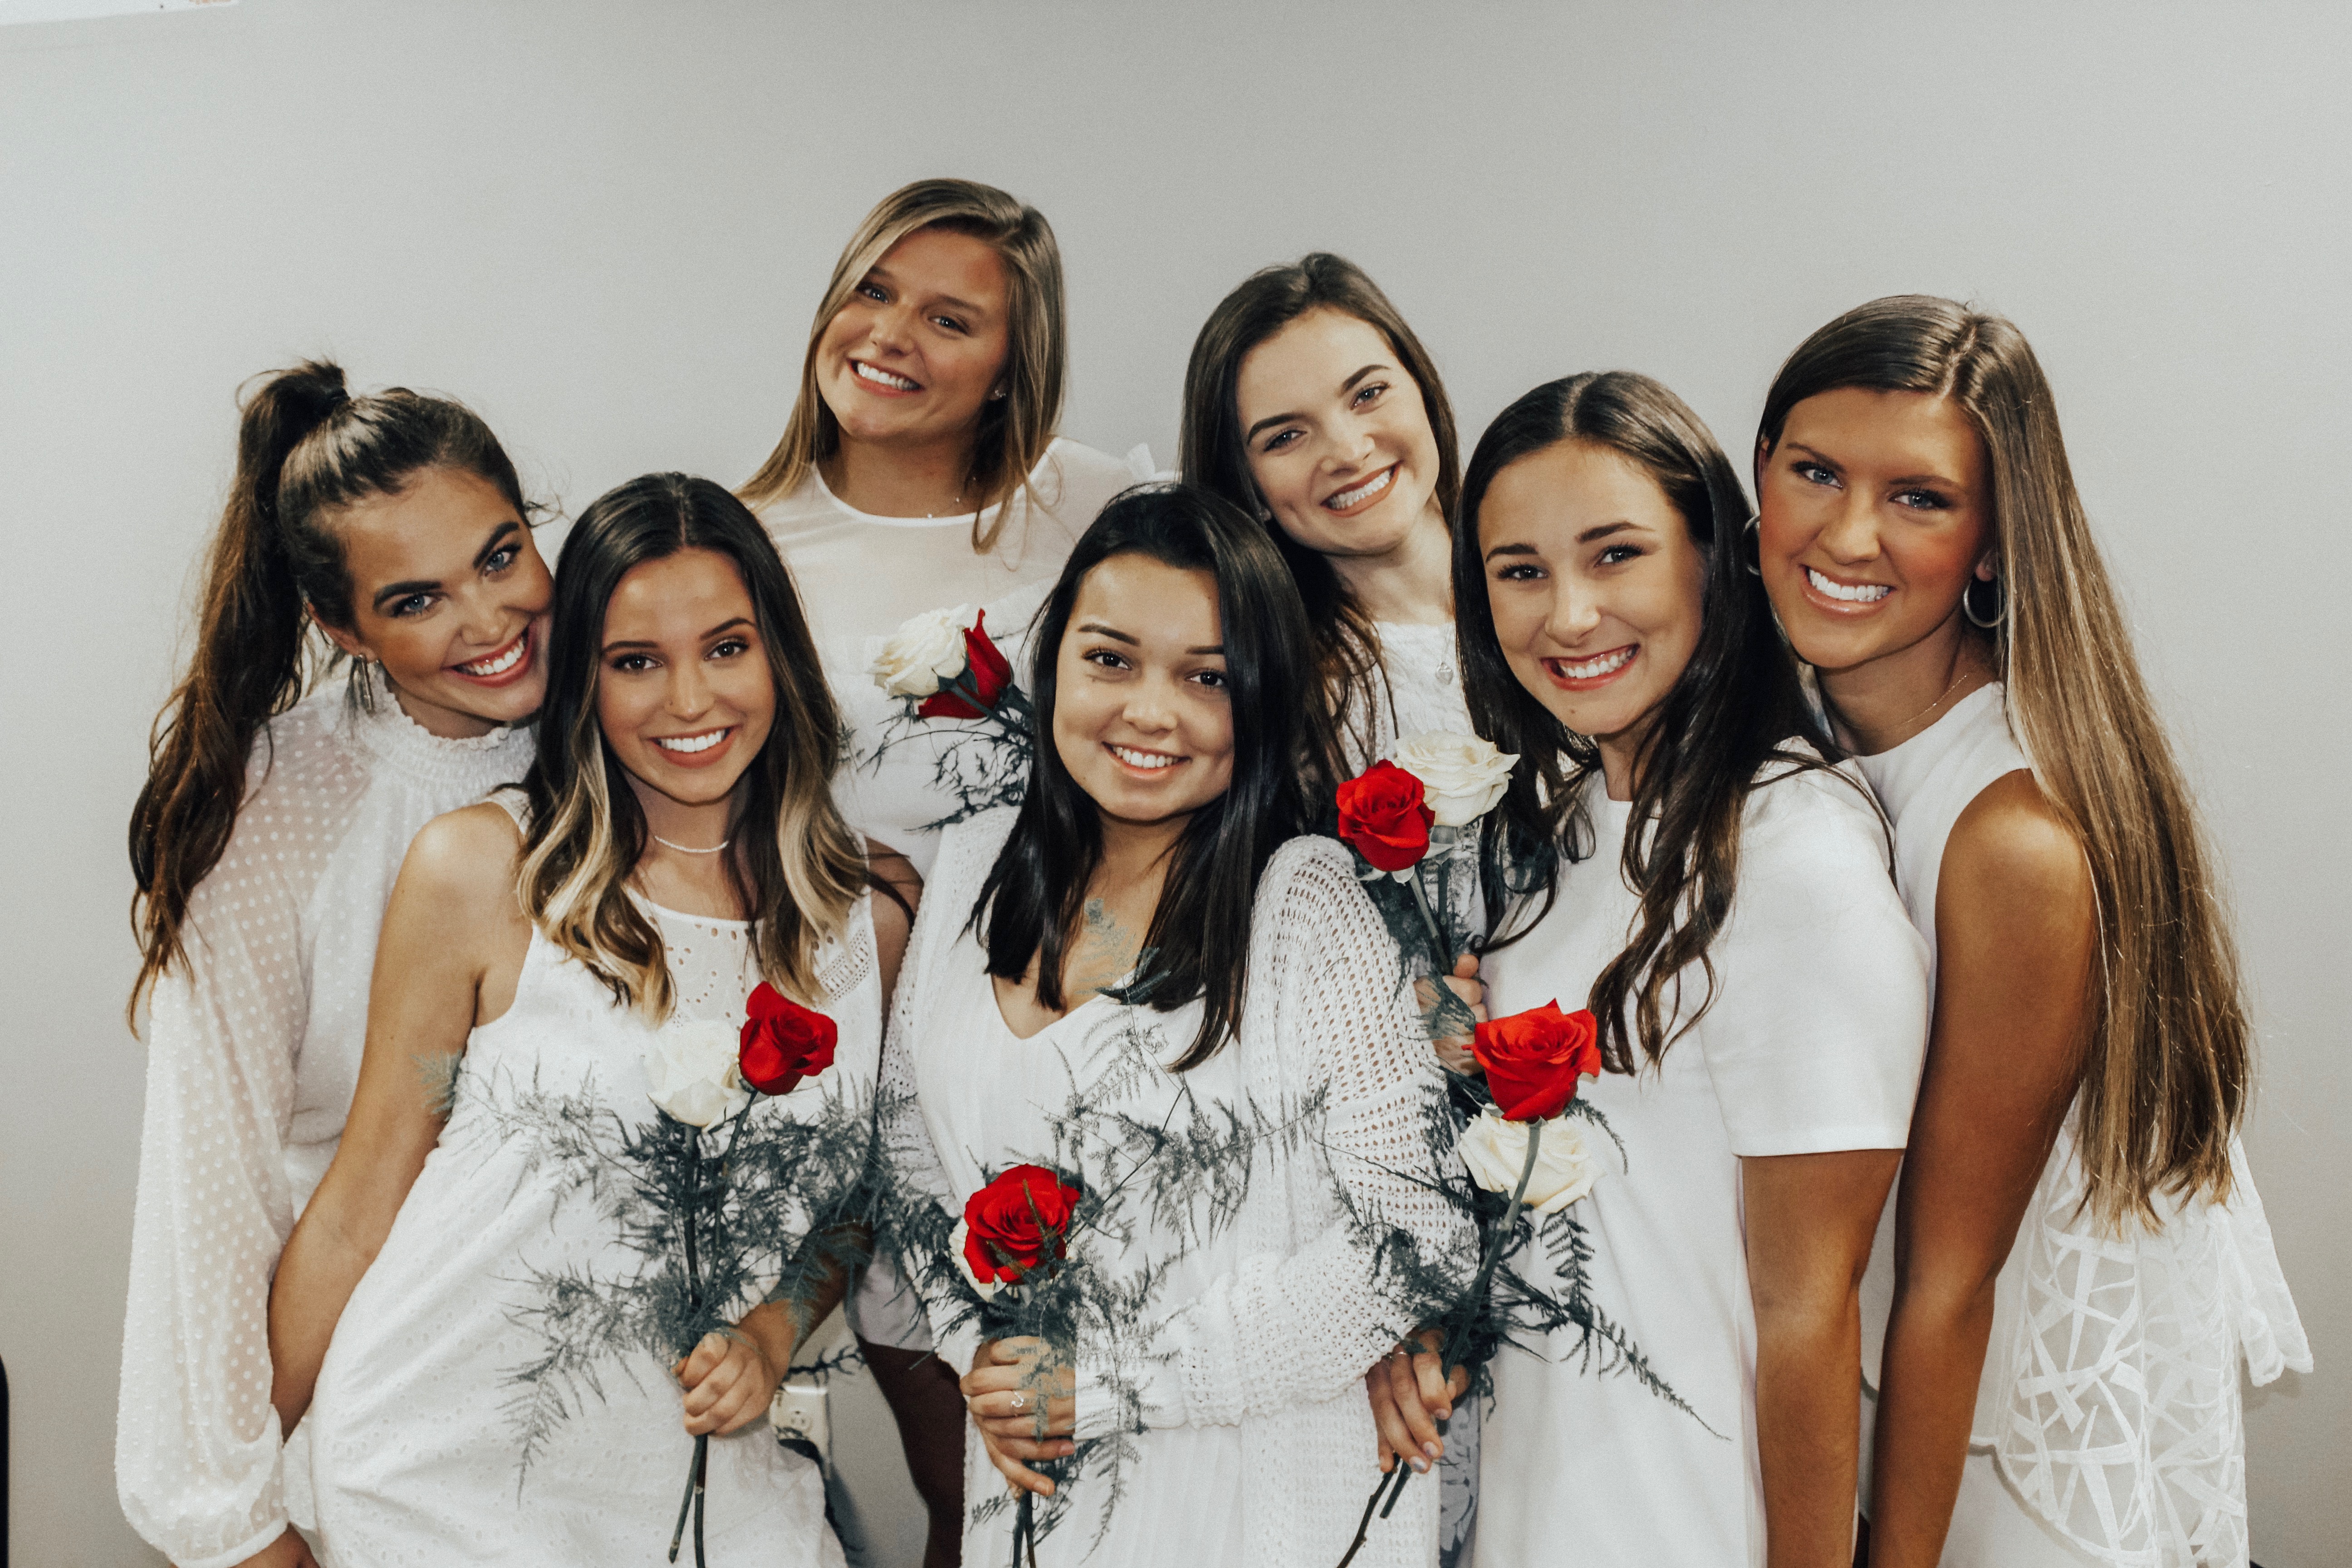 Alpha Gamma Delta member dressed in white dresses, holding red roses and smiling.